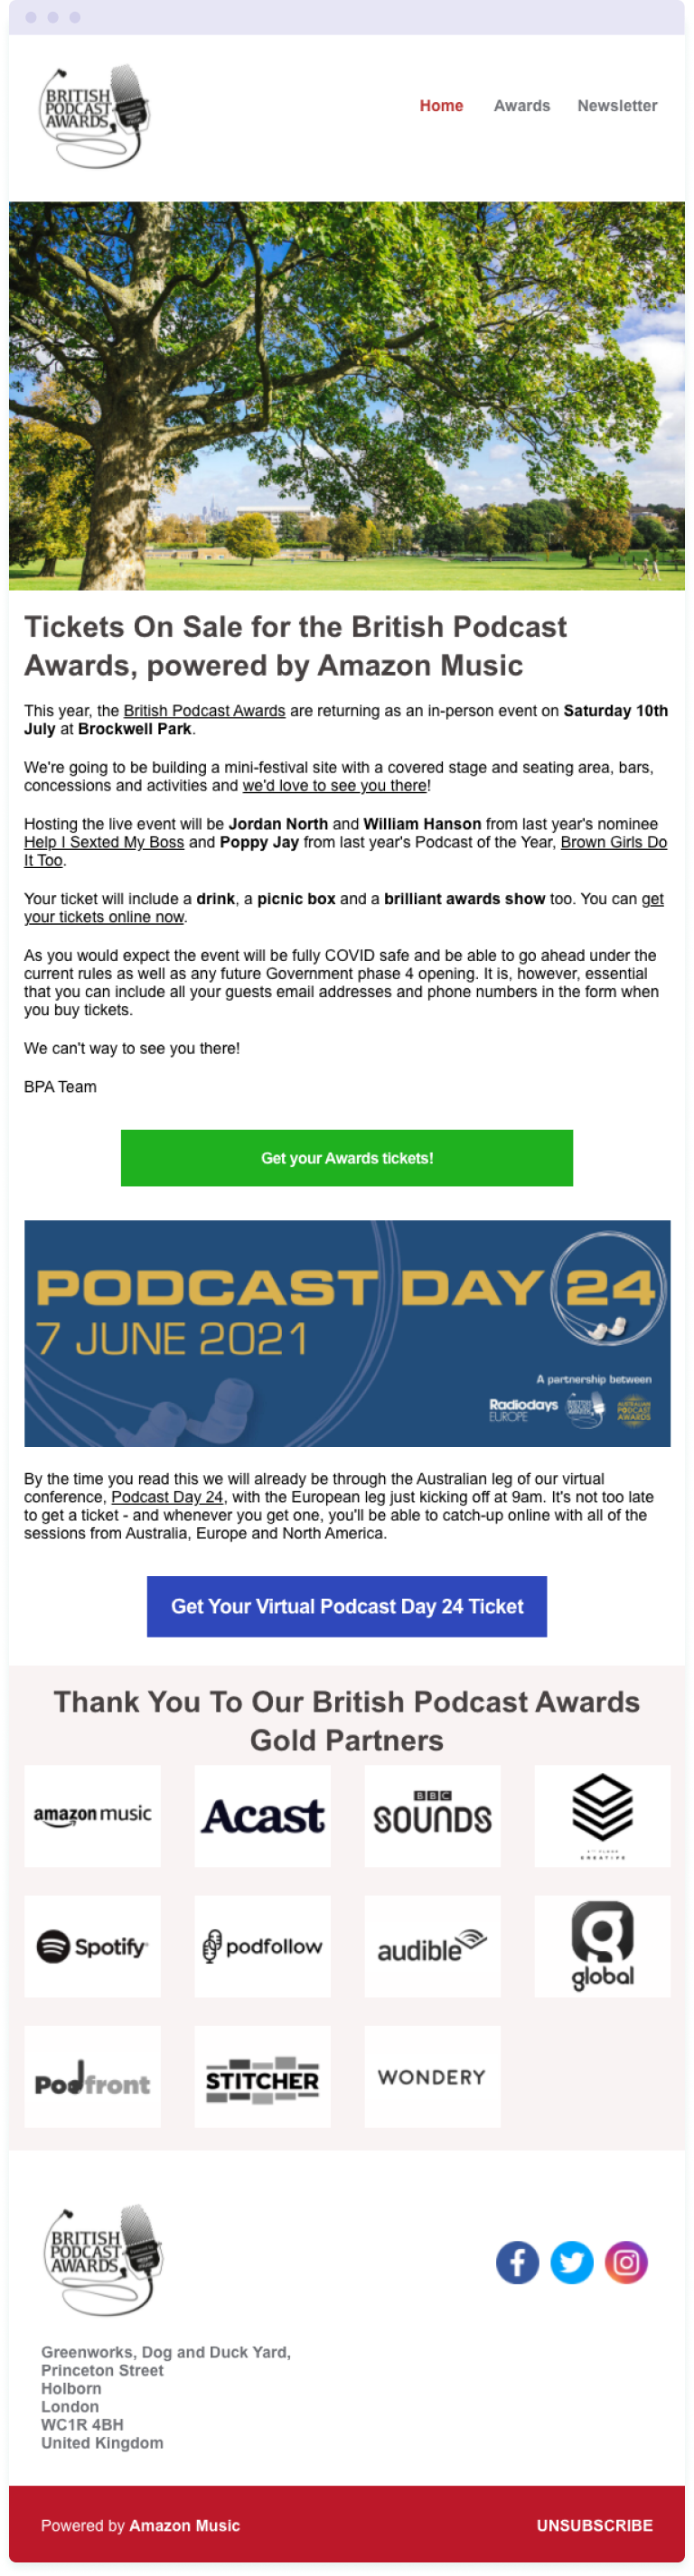 Example of an event invitation email from the British Podcast Awards – one type of email you might send subscribers when you're getting started with email marketing